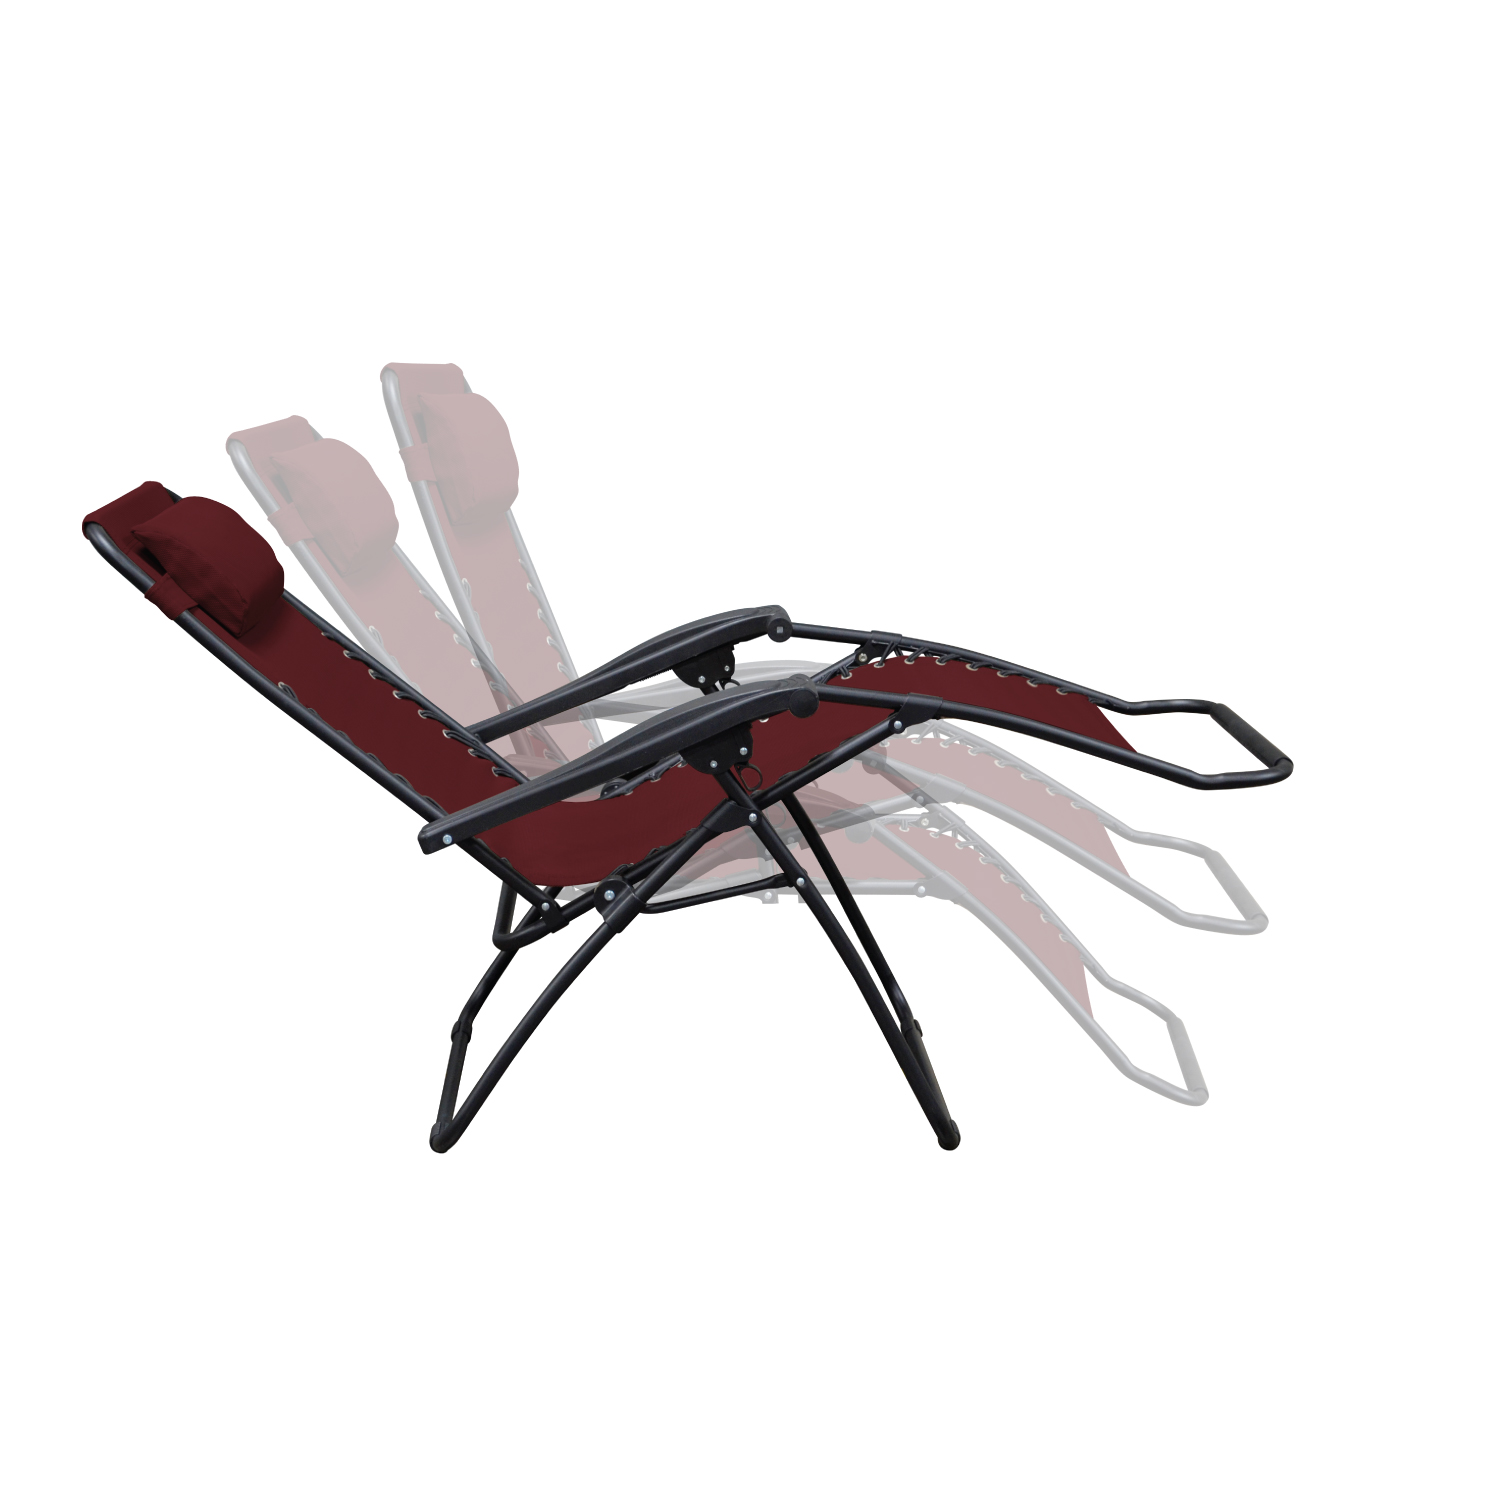 Zero Gravity Chair Oversized Caravan, Oversized Zero Gravity Chair With Folding Canopy Shade Cup Holder